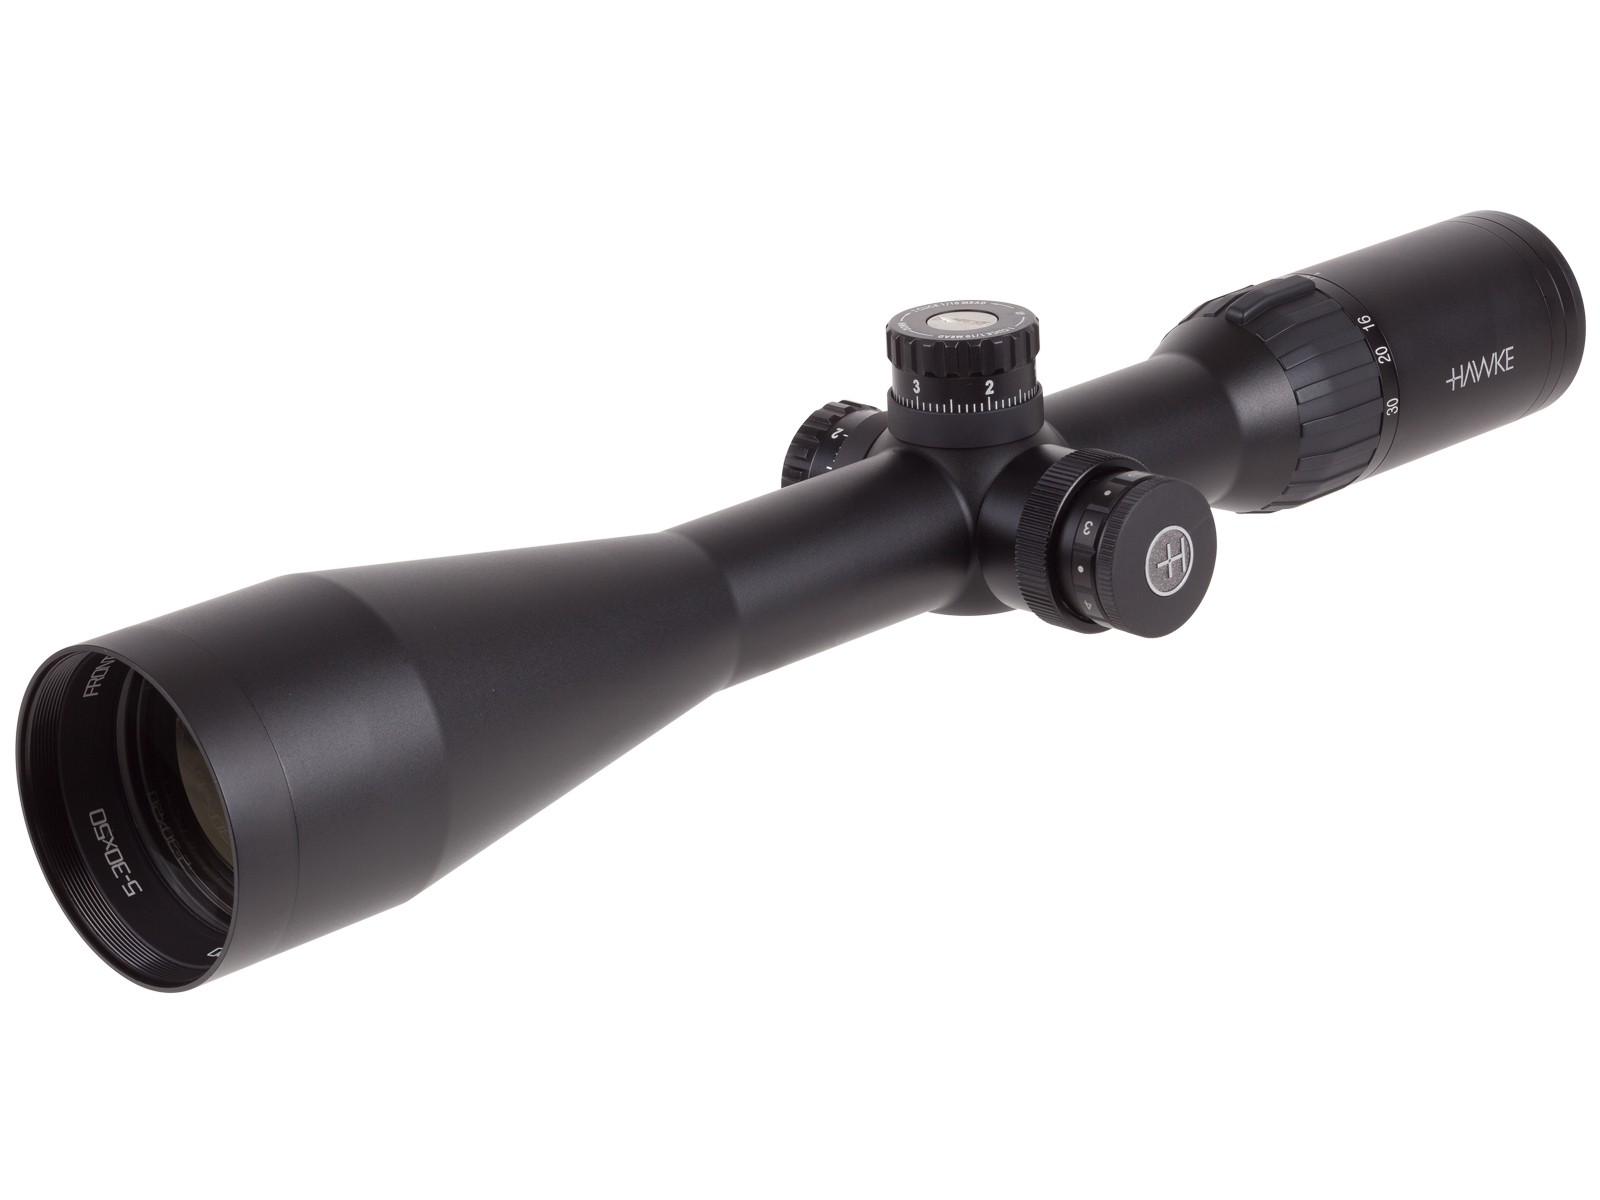 Hawke Frontier 30 Side Focus 5-30x50 Rifle Scope, TMX Reticle, 0.1 MIL, 30mm Tube